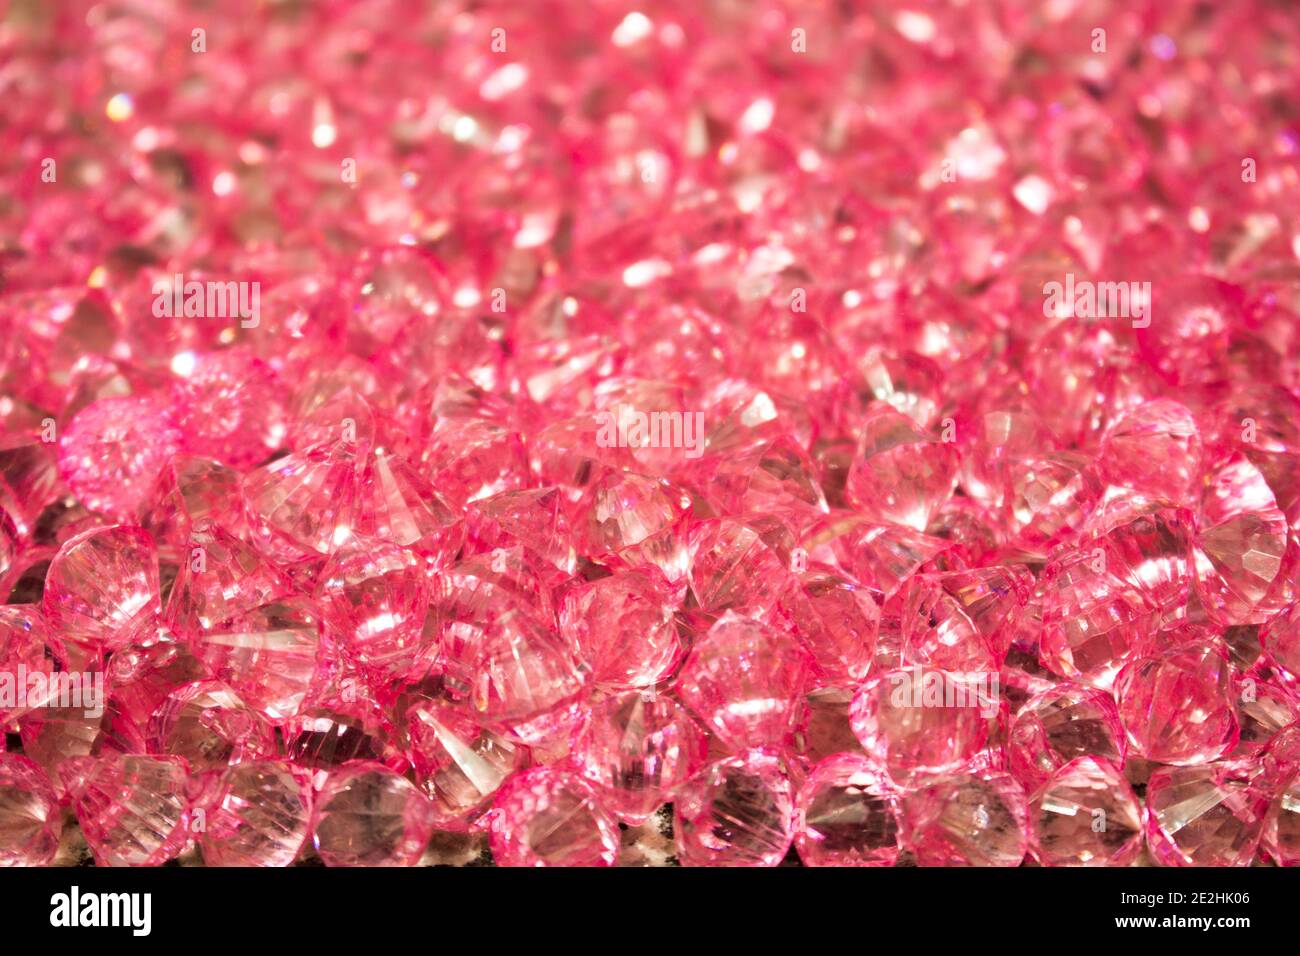 Group of pink glass beads together forming a texture Stock Photo